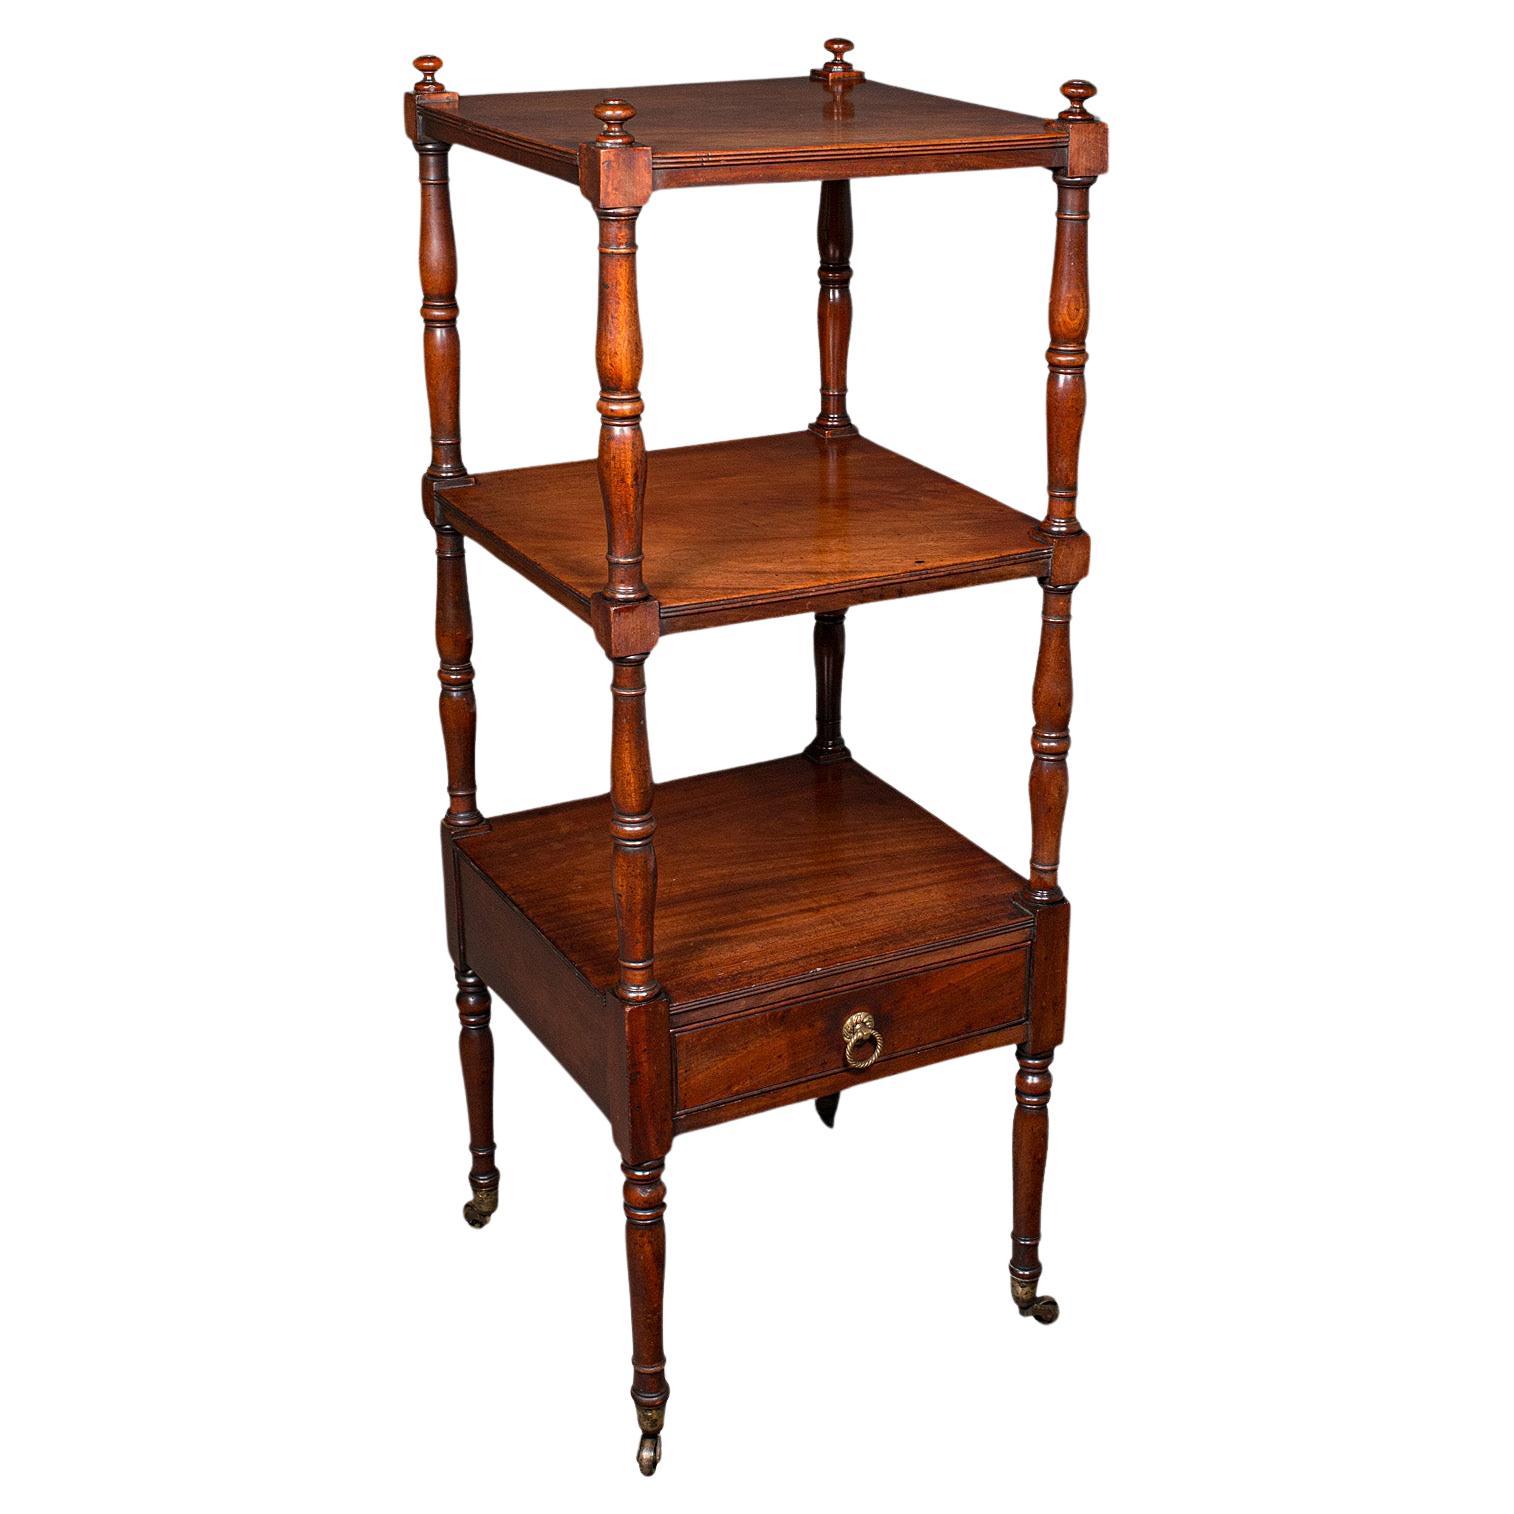 Antique 3 Tier Whatnot, English, Open Display Stand, Late Georgian, Circa 1800 For Sale